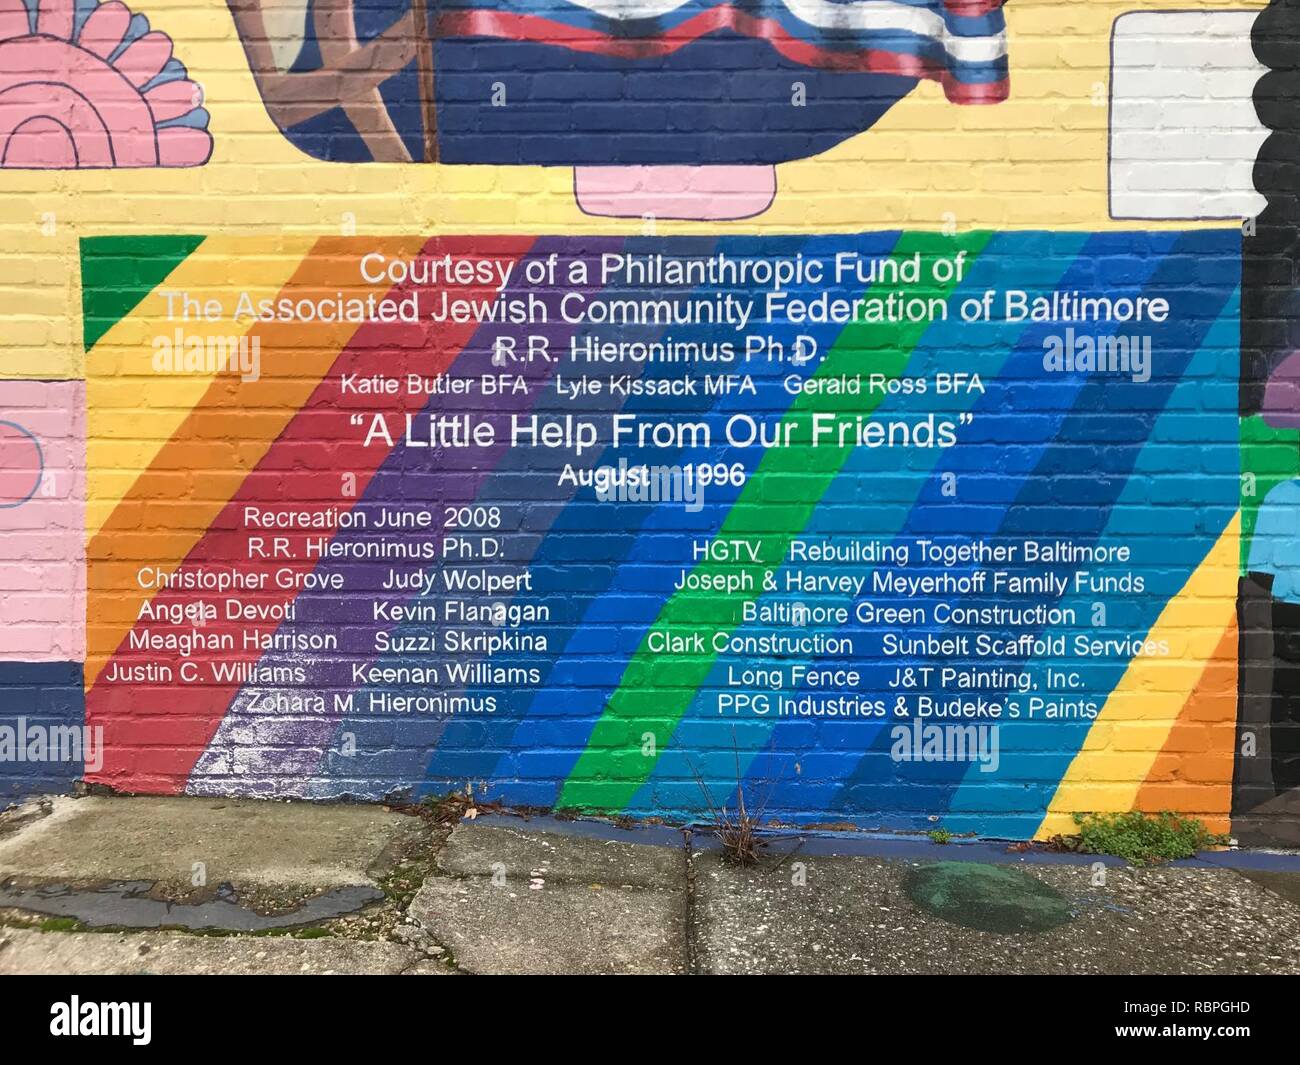 ‘A Little Help From Our Friends‘ (1966; Robert Hieronimus, muralist), Venable Avenue and Greenmount Avenue (southeast corner), Baltimore, MD 21218 (25787212967). Stock Photo